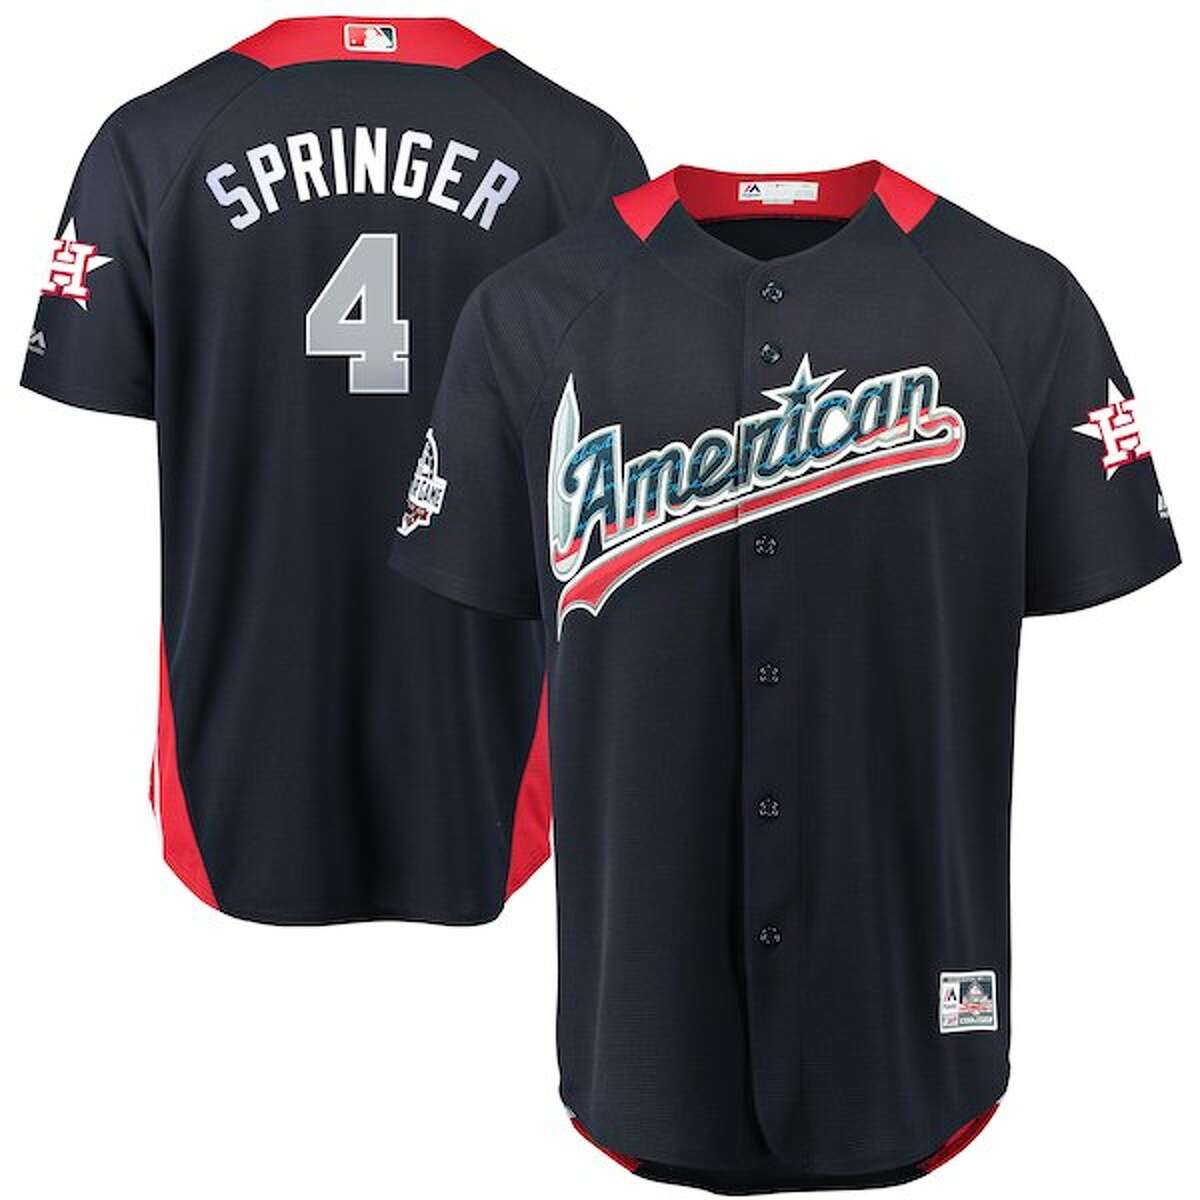 Our partners at Fanatics.com are geared up for the All-Star game with these hot new styles featuring your favorite members of the Houston Astros, including Jose Altuve, Justin Verlander, George Springer, Alex Bregman and Gerrit Cole. (See price on Fanatics.com)